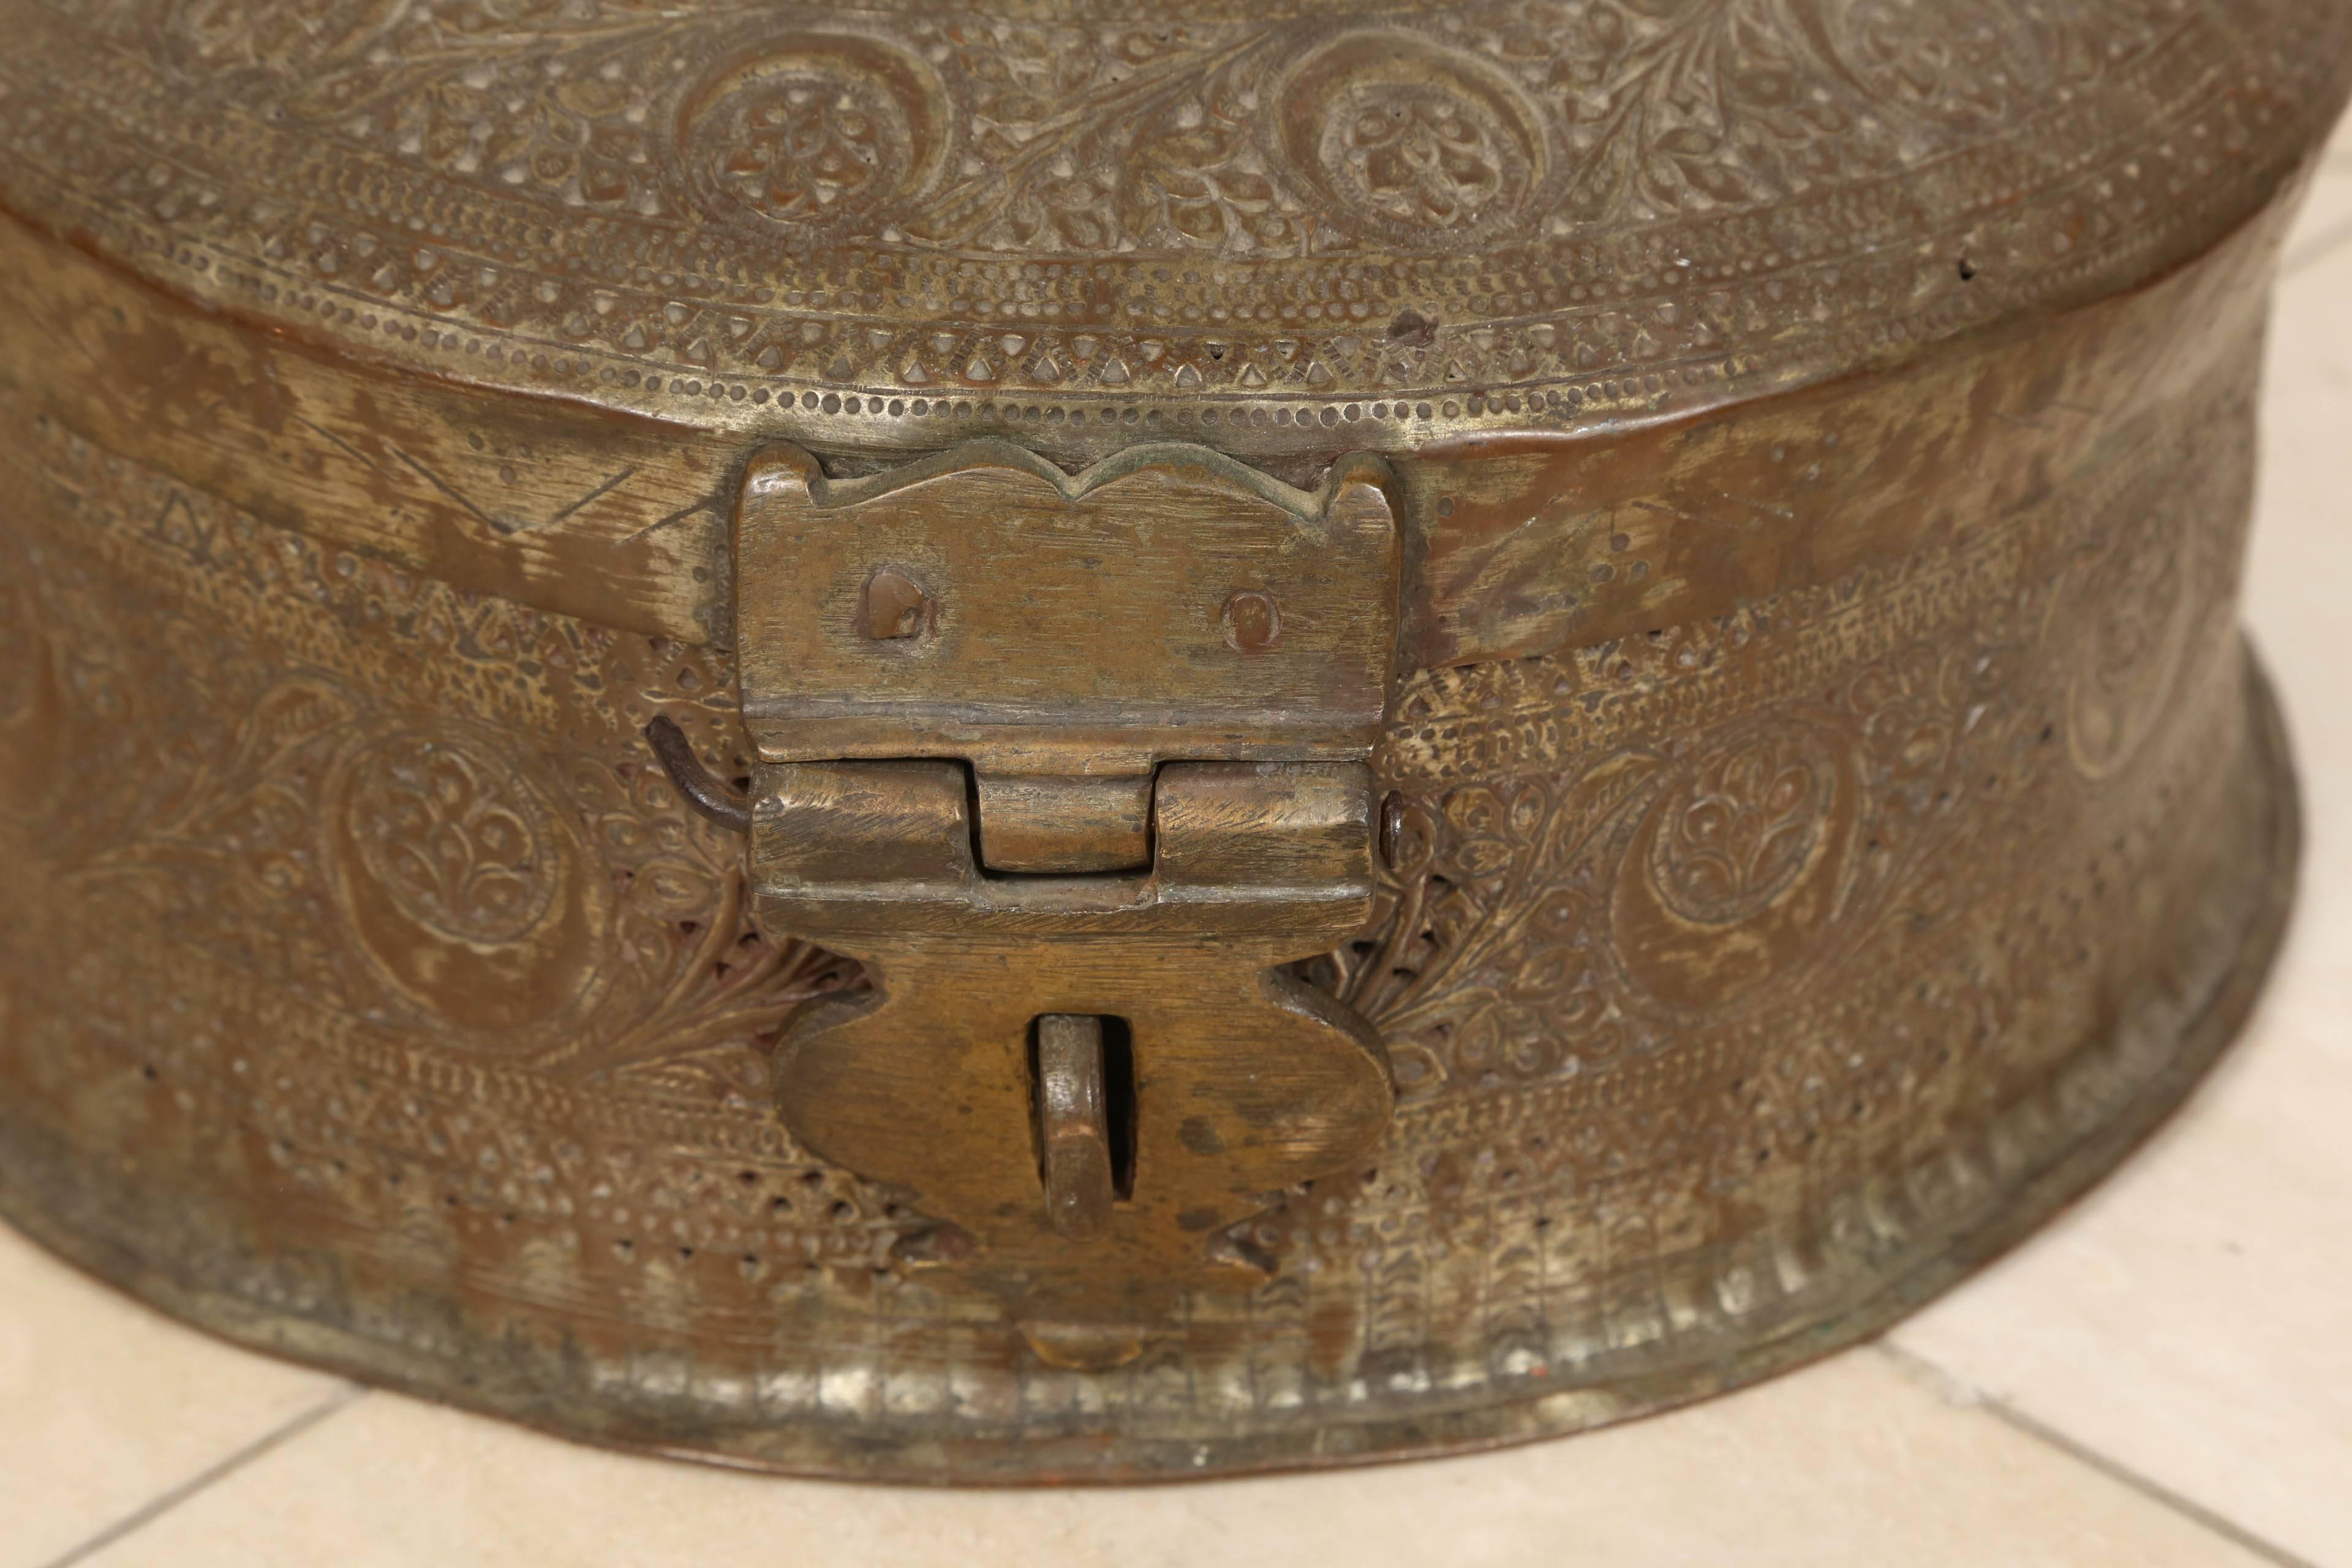 Beautiful hand-crafted decorative round bronze Anglo Indian box with with lid, latch and handle
Delicately and intricately hand-hammered with floral and geometric designs.
Probably used as a tea caddy or treasure chest.
Tinned copper with brass